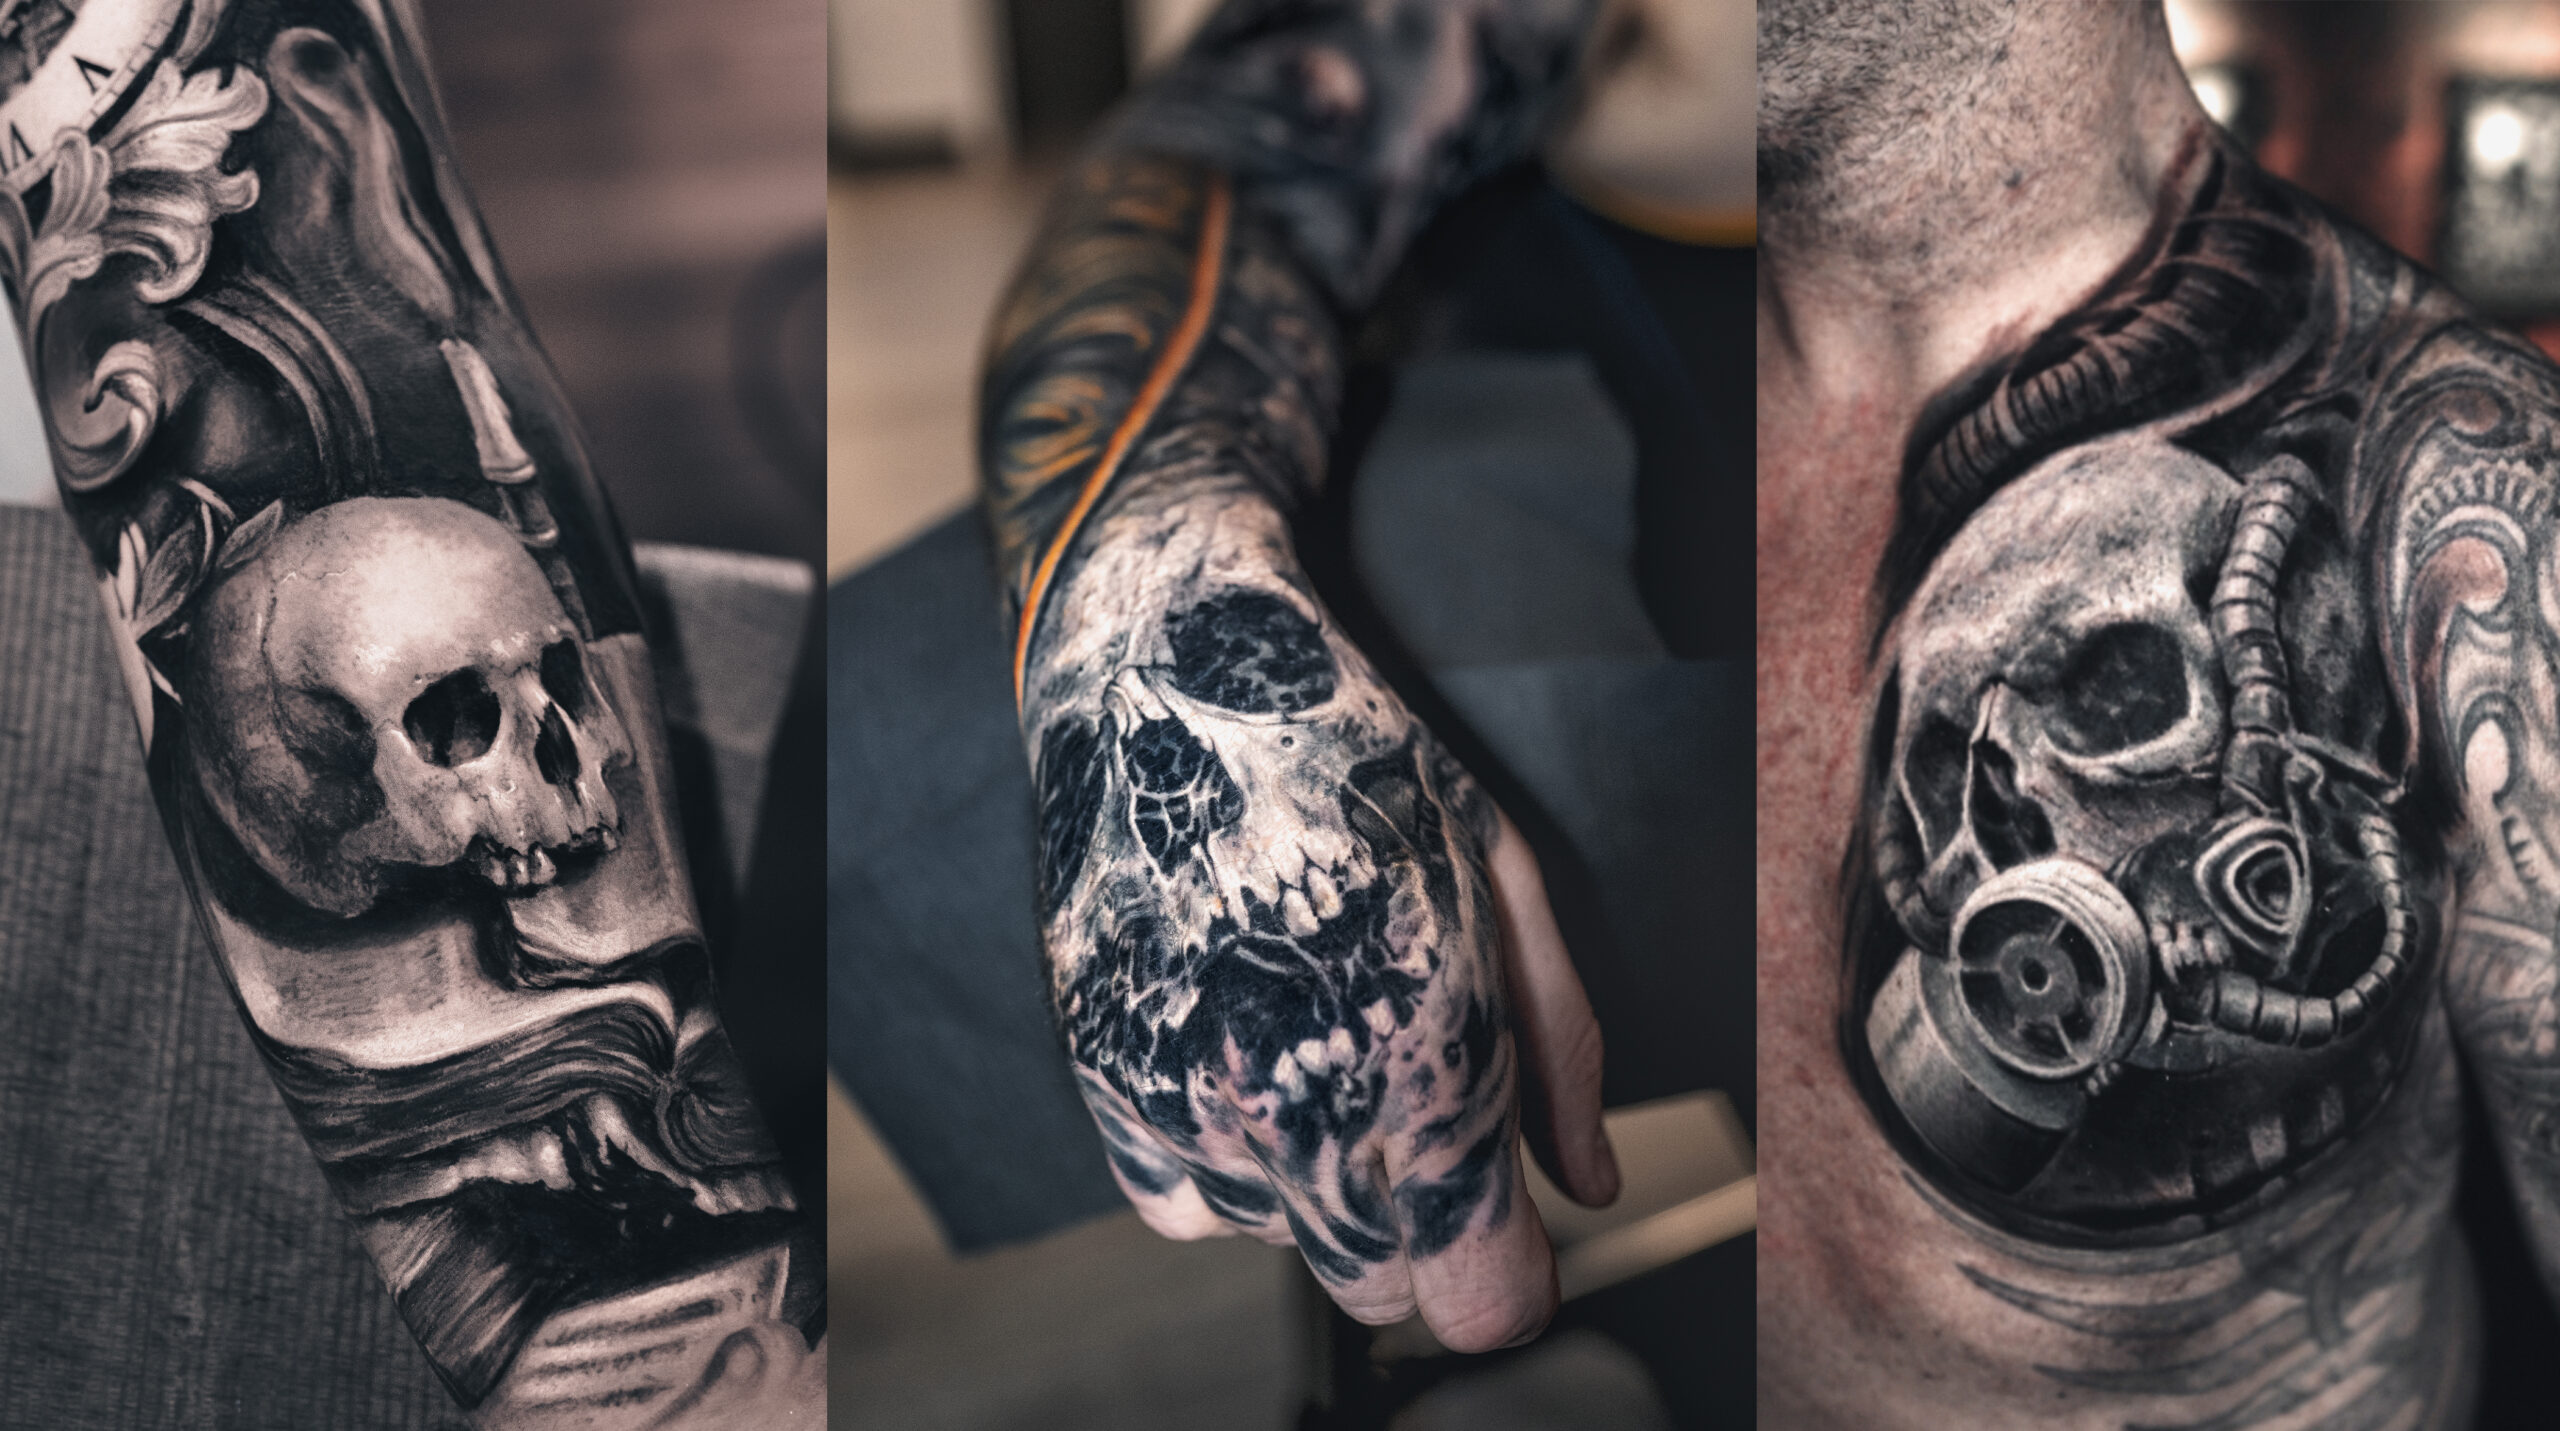 Skull Tattoo Meaning and Designs - Best Tattoo Shop In NYC | New York City  Rooftop | Inknation Studio